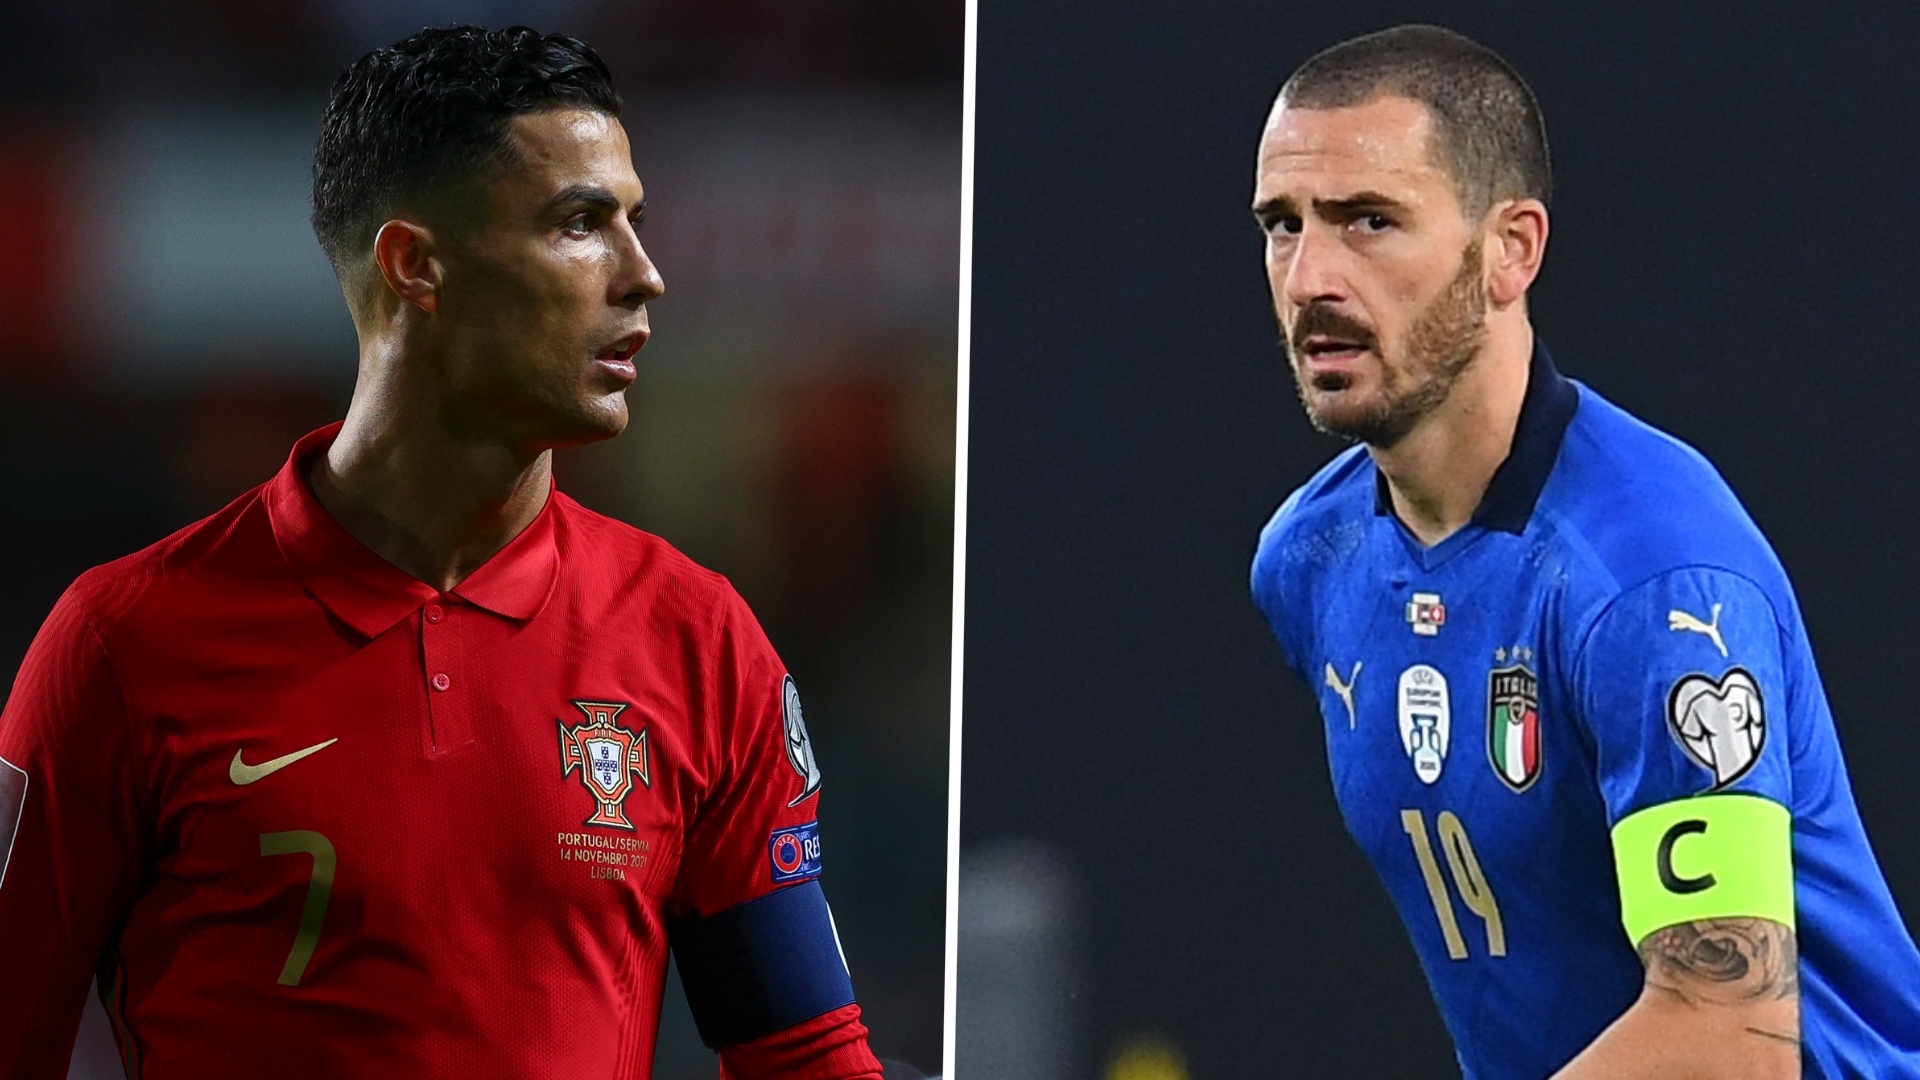 Italy, Portugal to fight for a World Cup berth